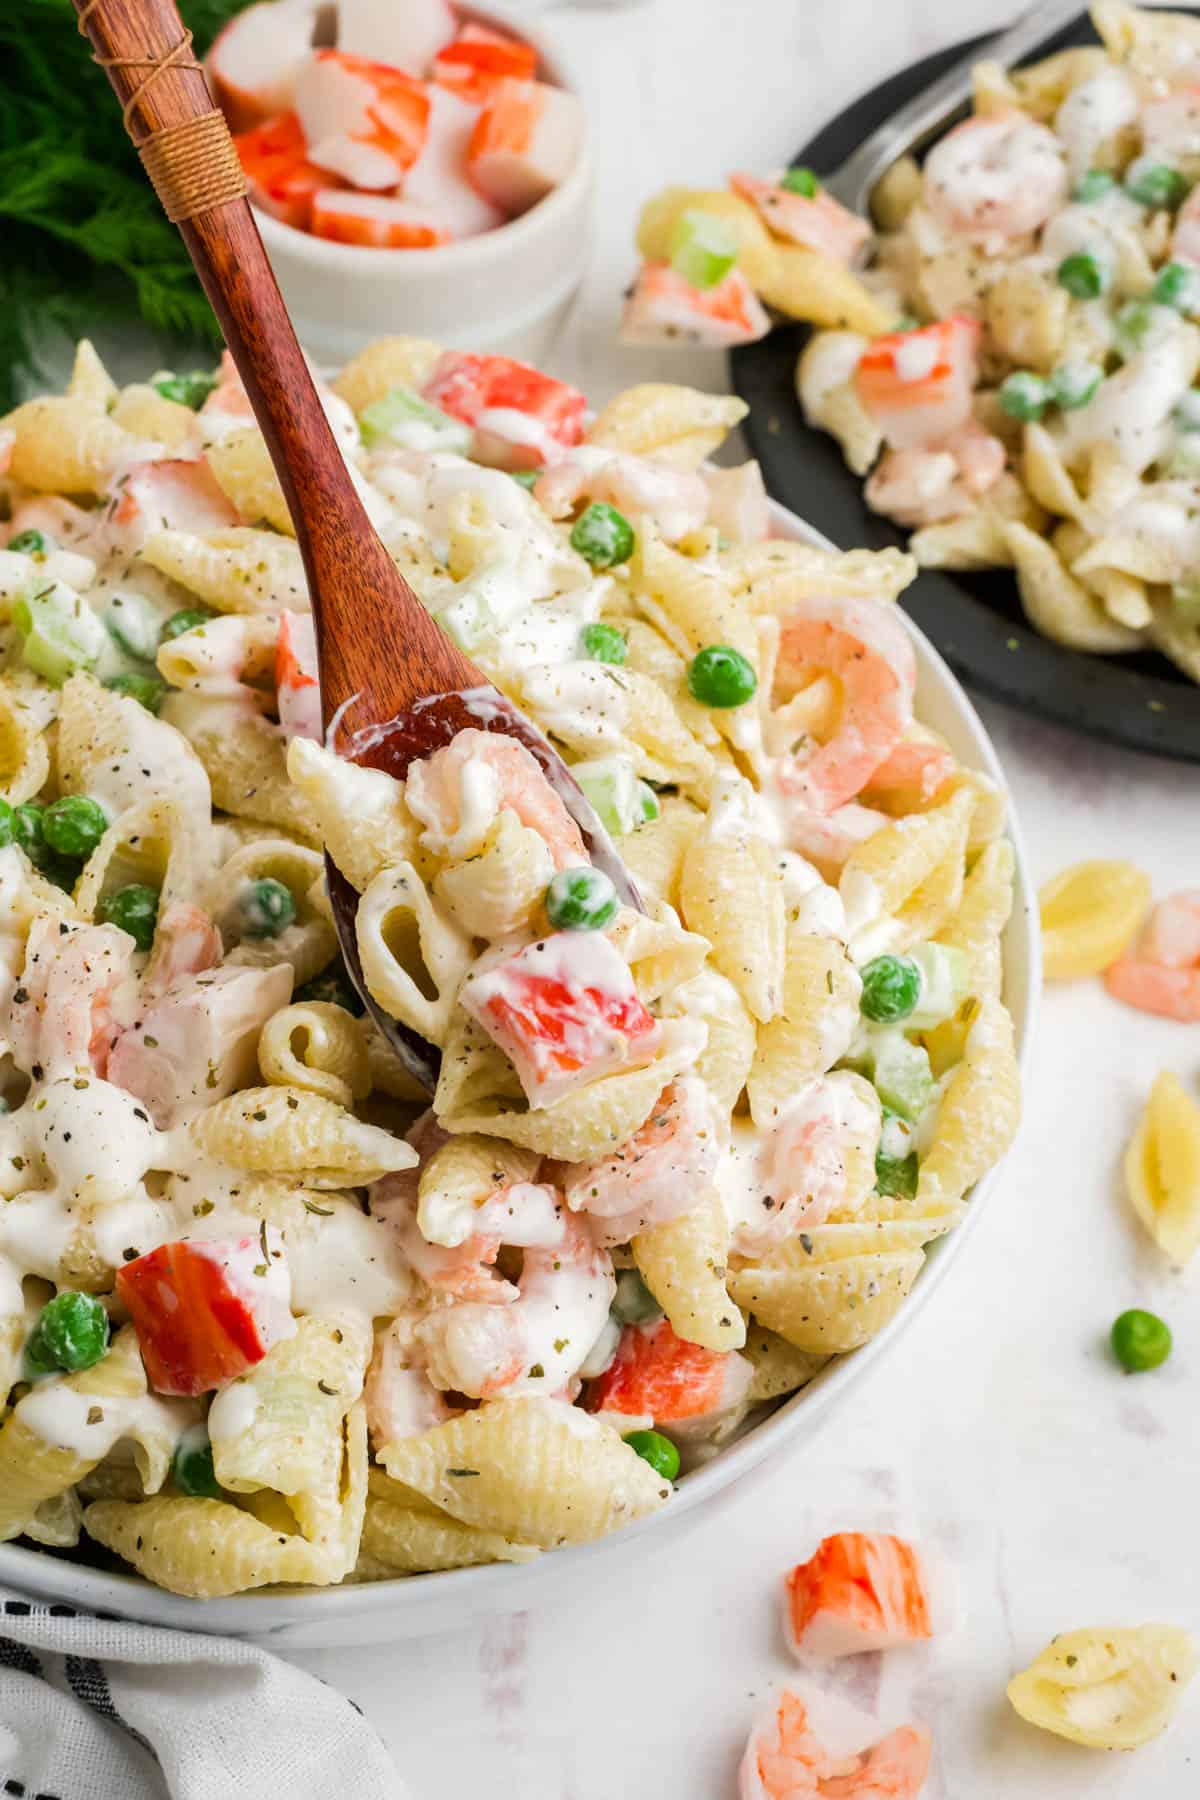 A spoon scooping up some seafood pasta salad.